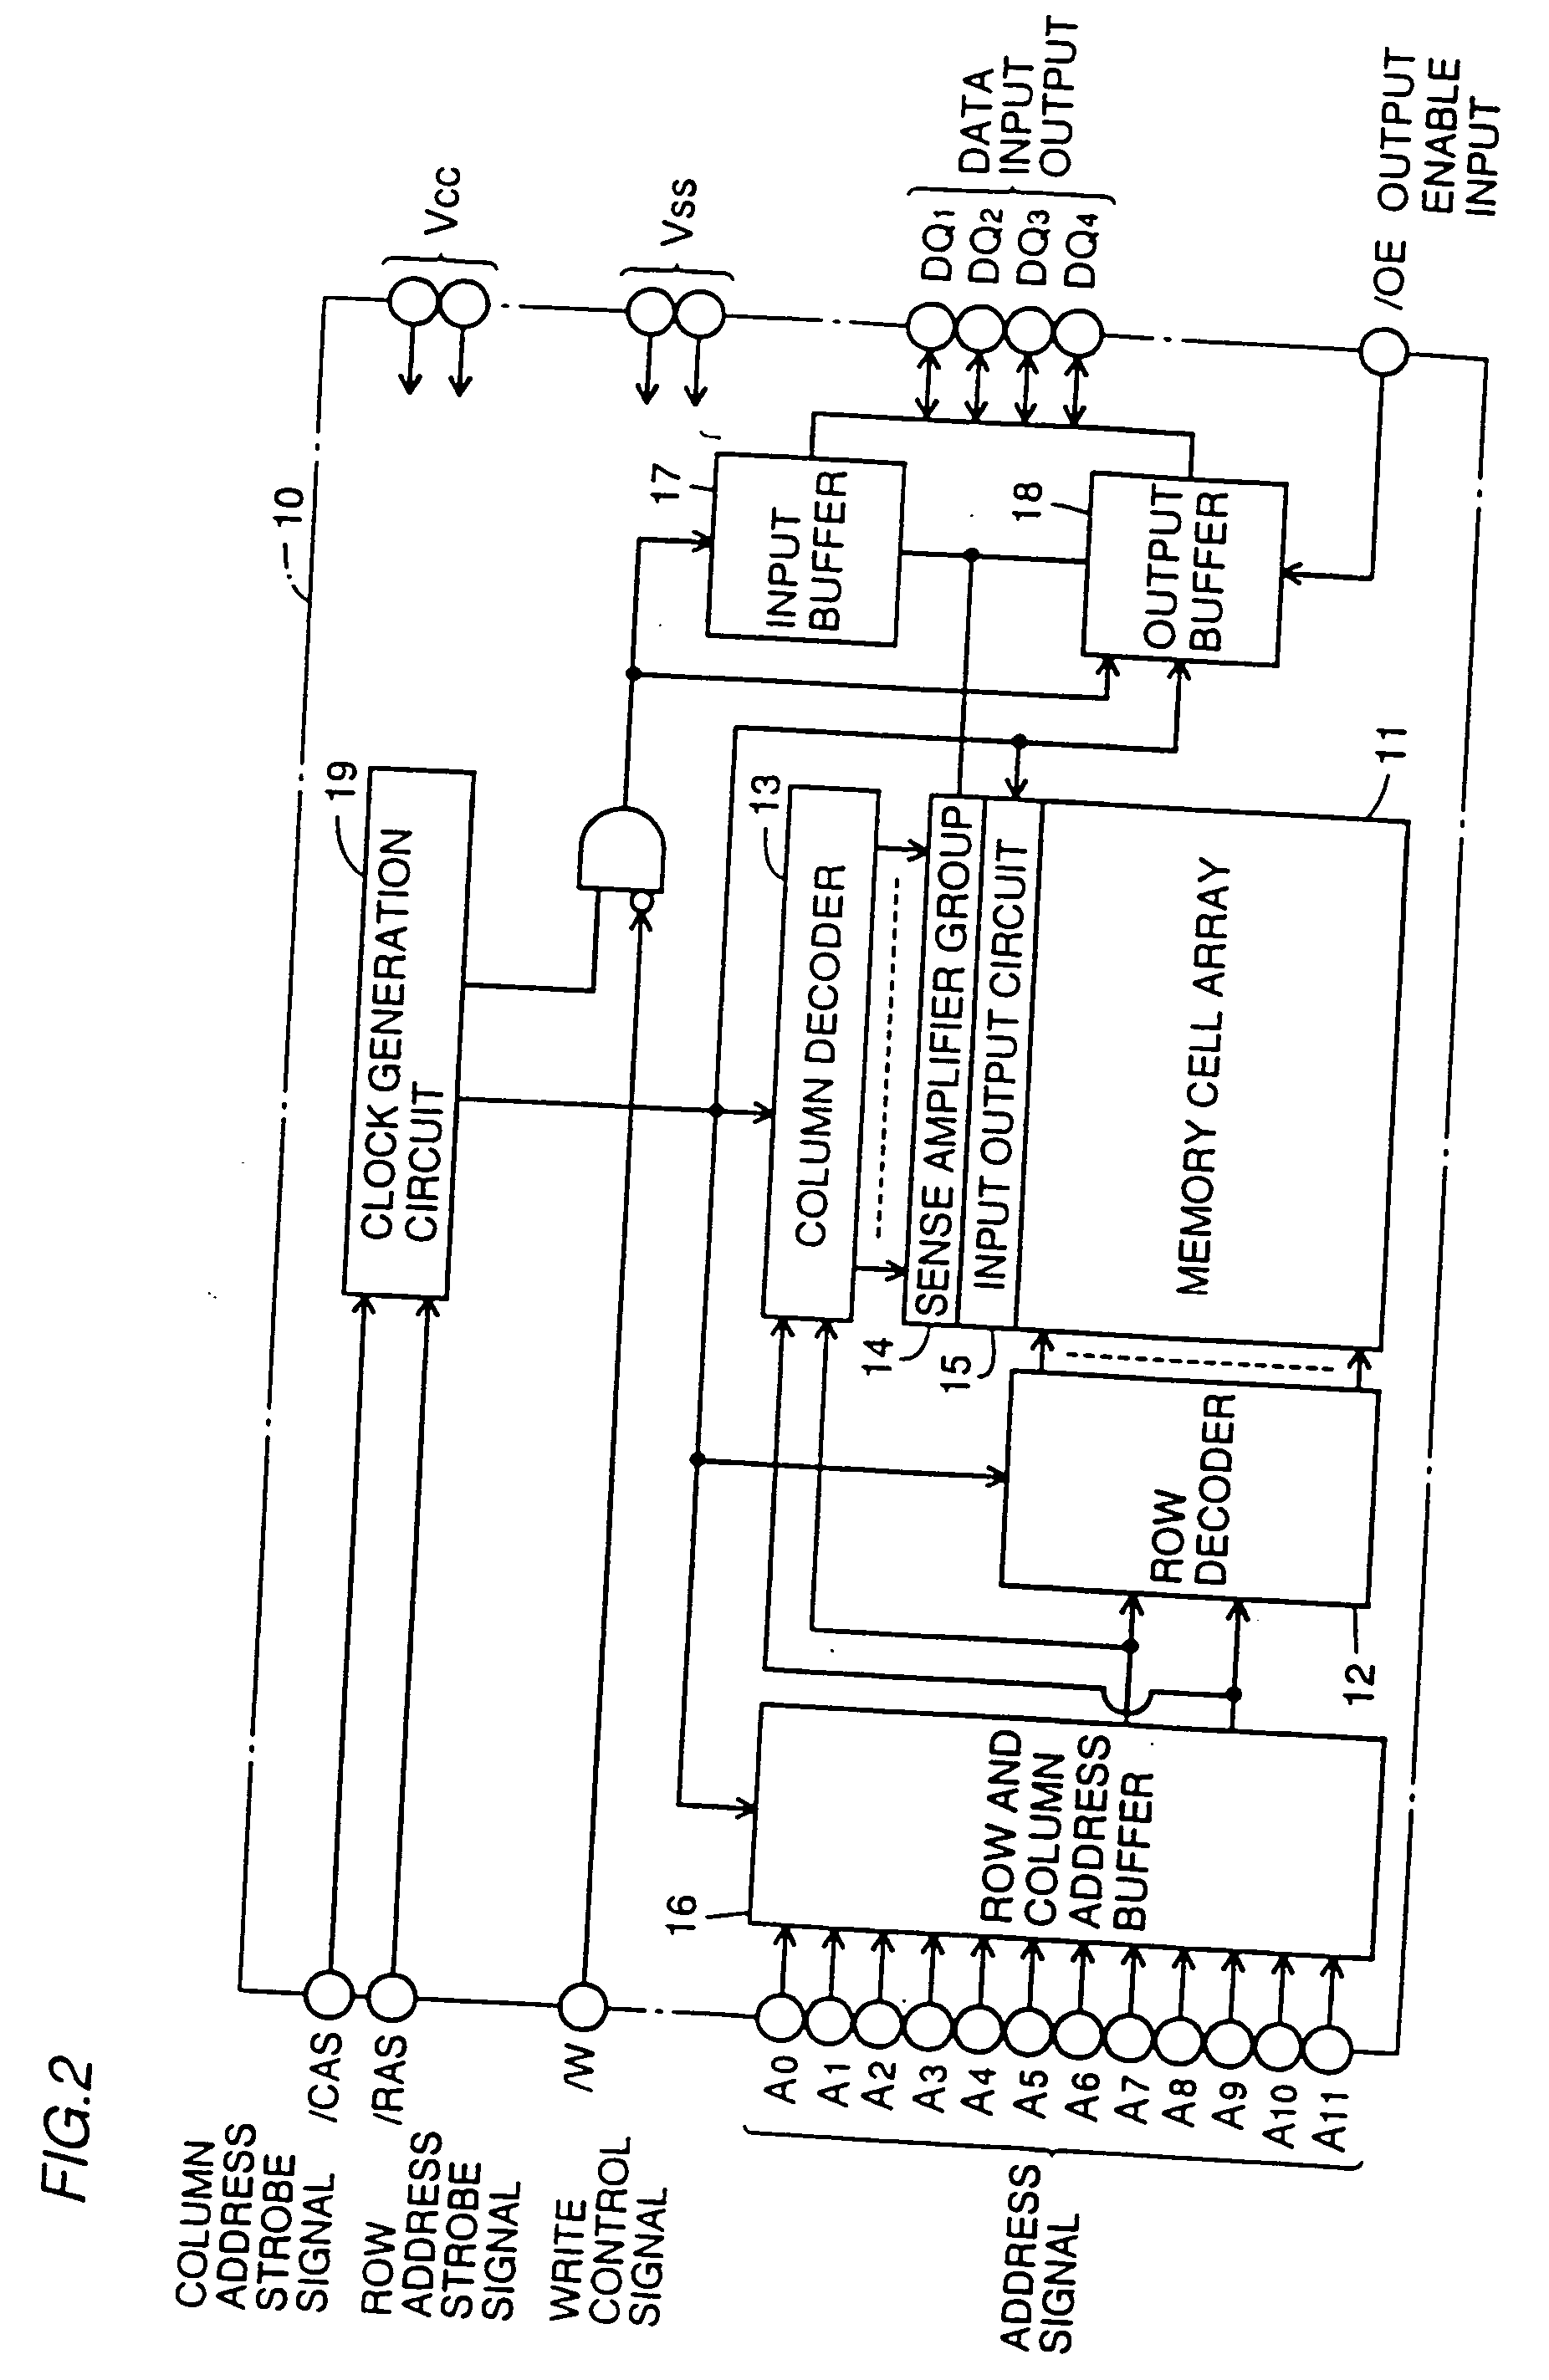 Semiconductor memory device including an SOI